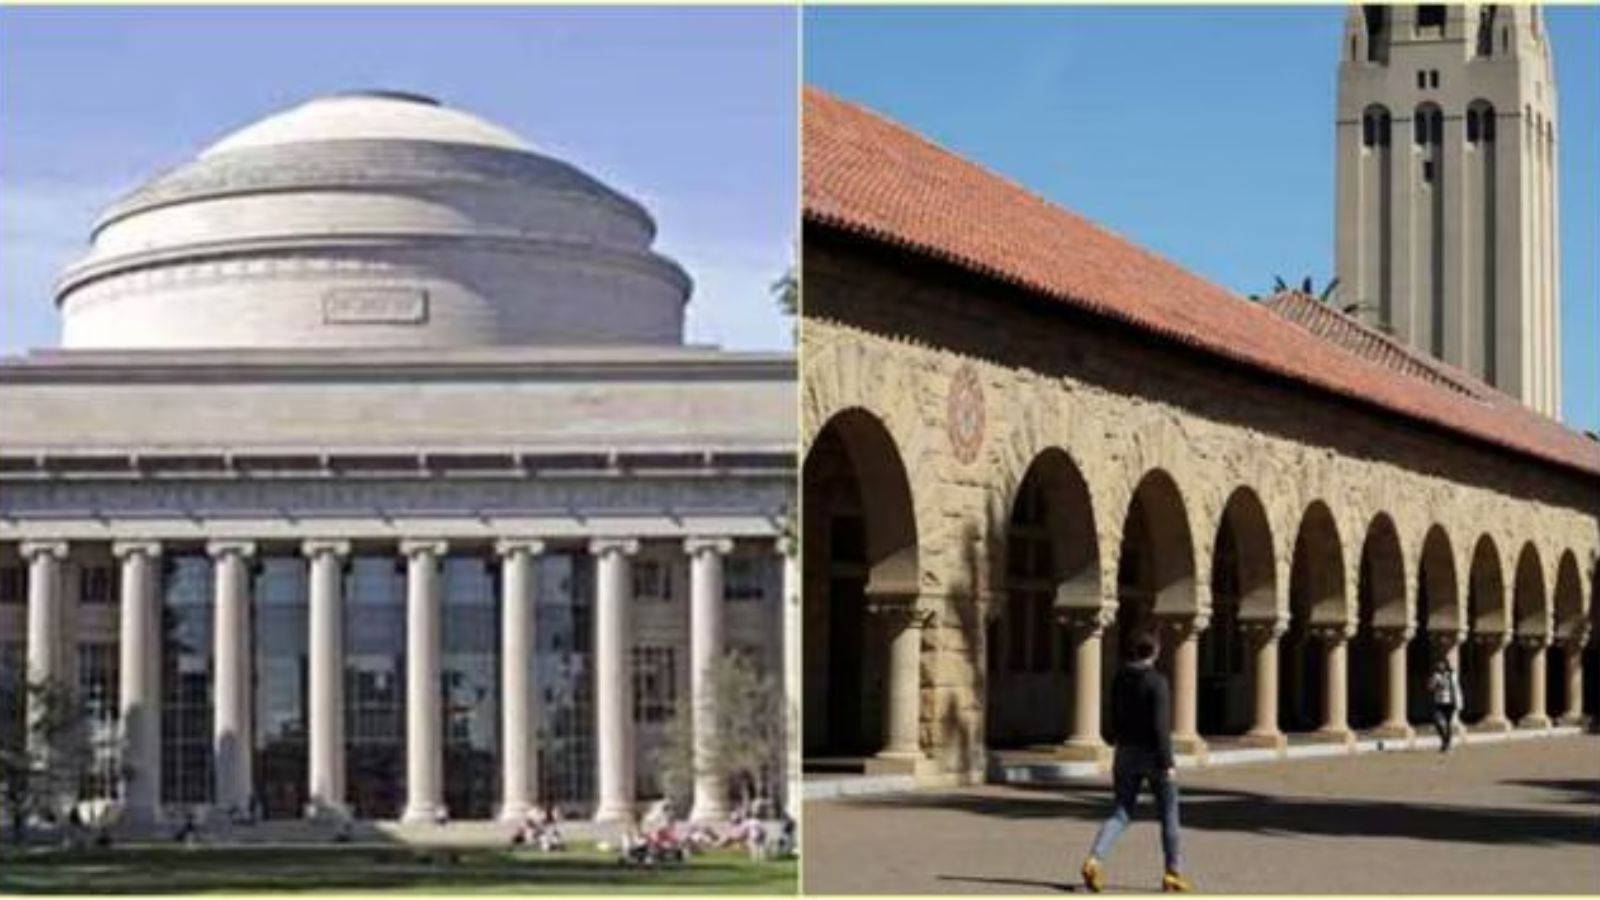 According to US News 2024, MIT is ranked #2, and Stanford University is #3 among national universities for Engineering.